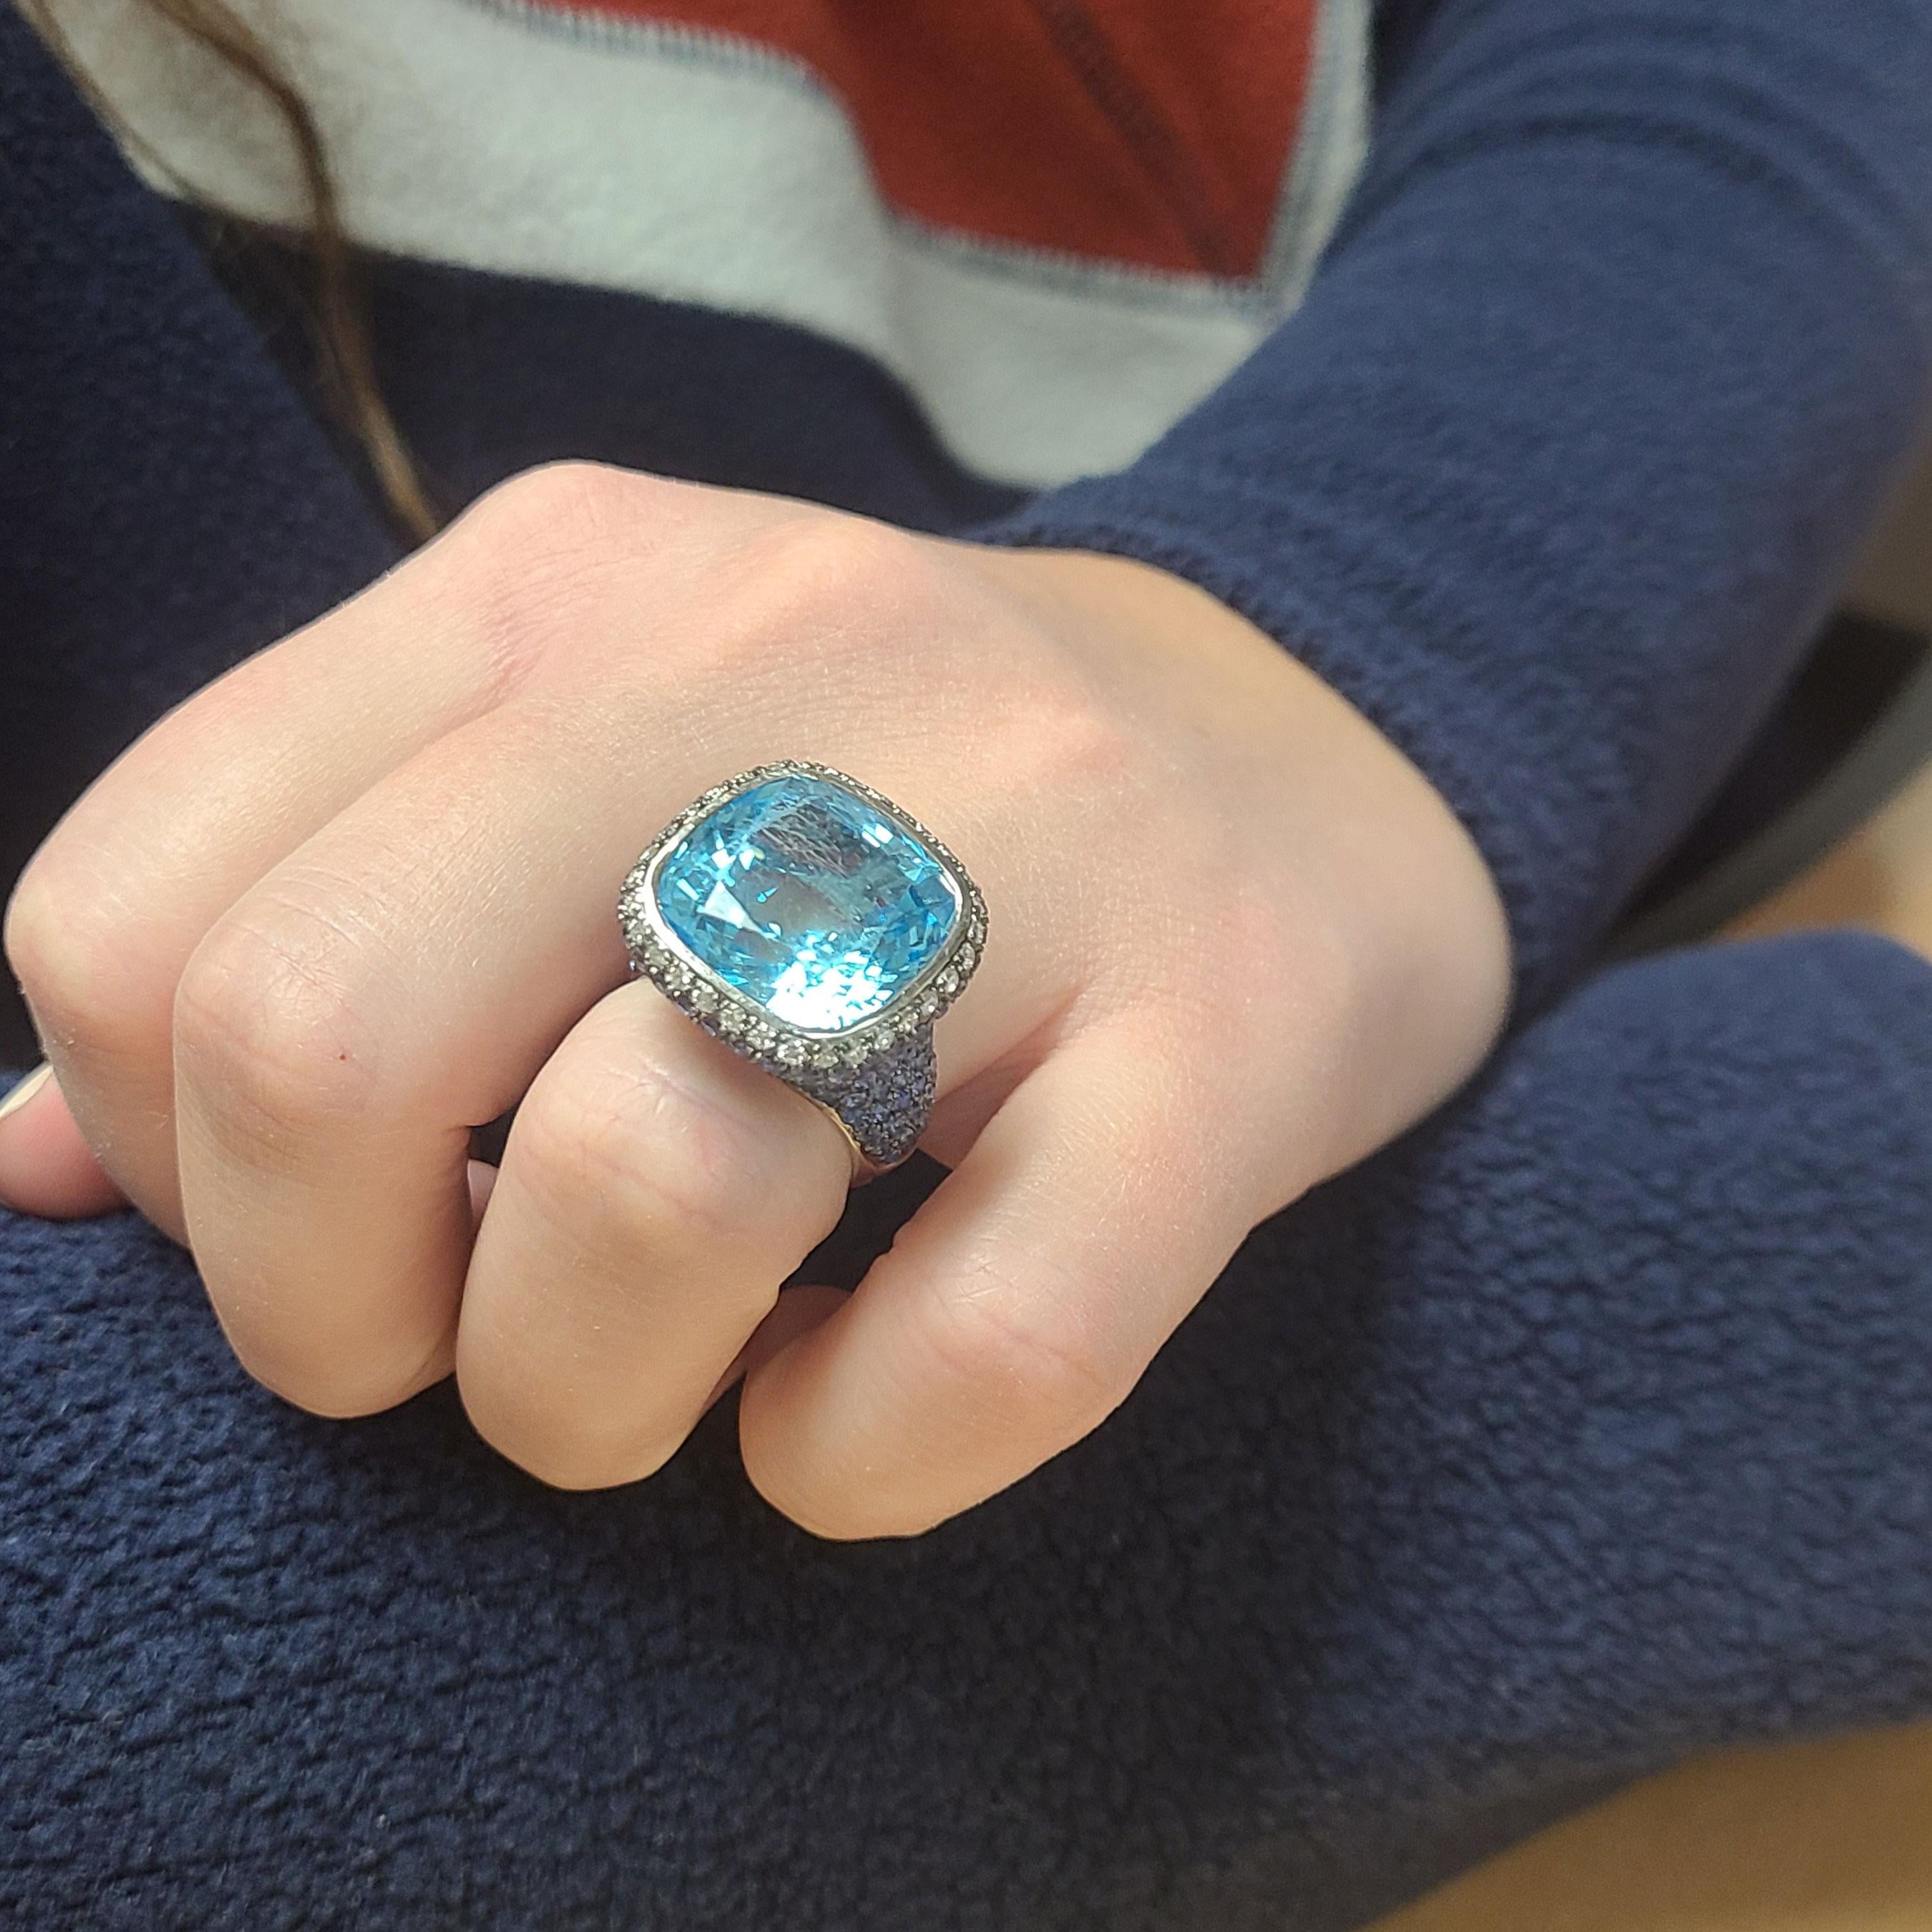 This ring is in 18K White Gold with a cushion cut blue Topaz at its center. It is surrounded by white Diamonds. Blue Sapphires run all the way down from the center down to the shank of the ring. The black background you see behind the Sapphires is